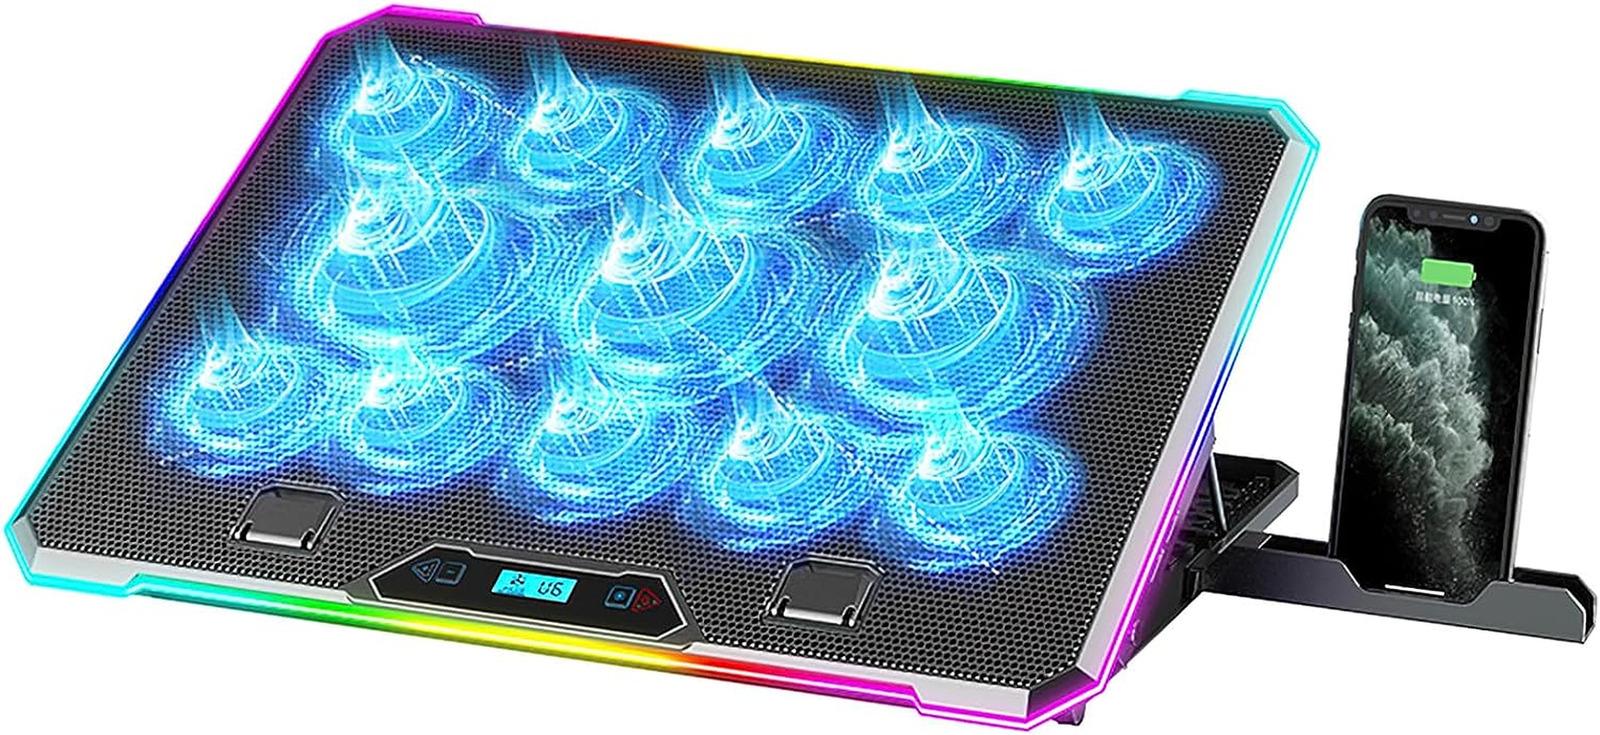 RGB Gaming Laptop Cooling Pad w/ 13 Quiet Cooling Fans for 15.6-17.3Inch Laptops